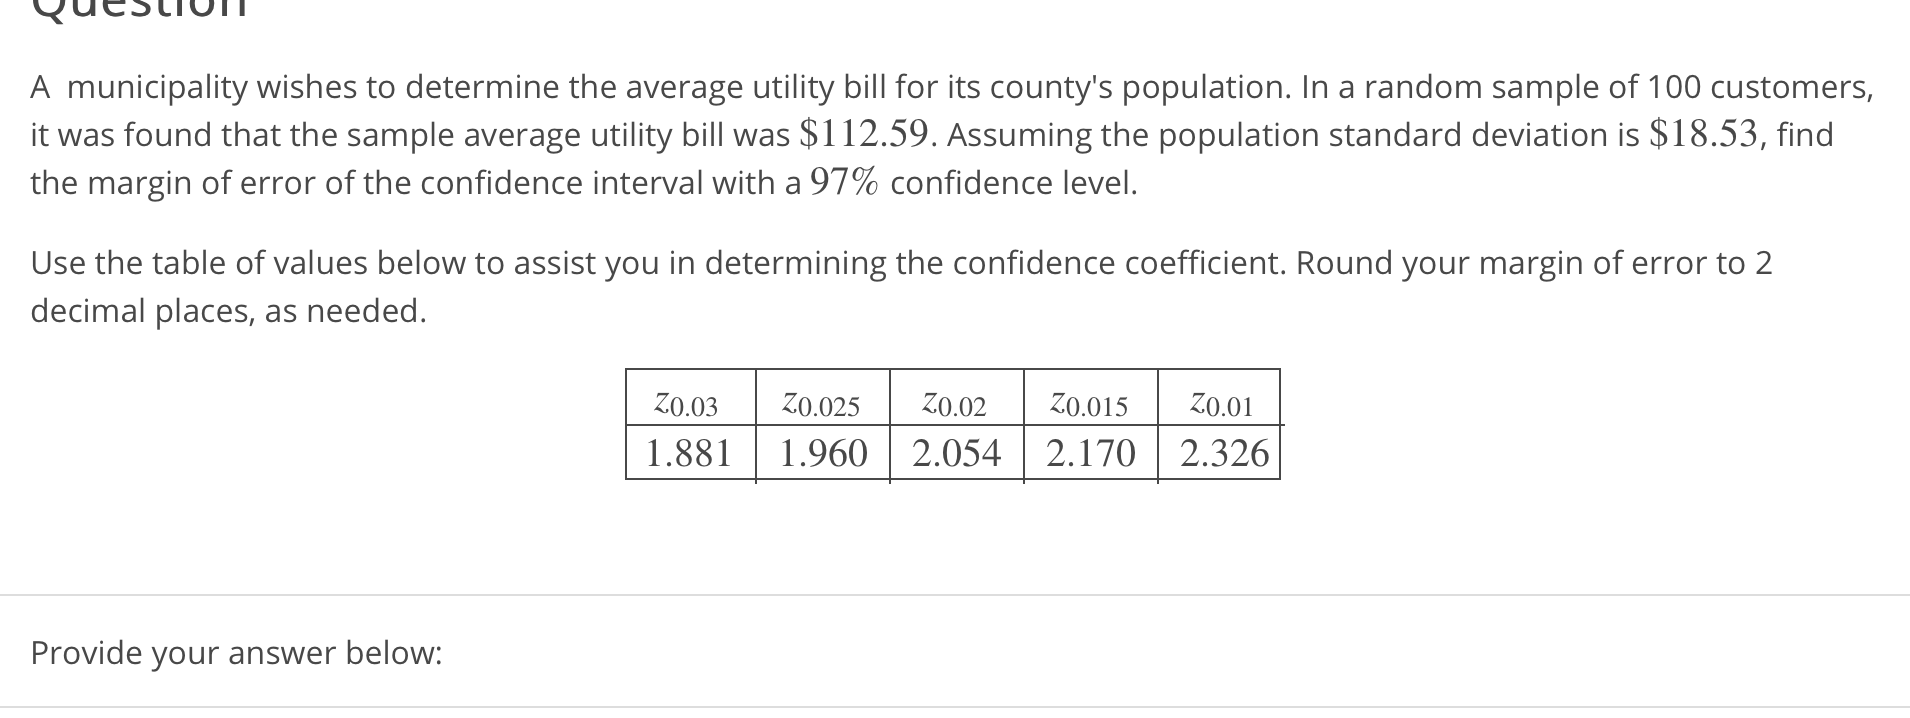 A municipality wishes to determine the average utility bill for its county's population. In a random sample of 100 customers,
it was found that the sample average utility bill was $112.59. Assuming the population standard deviation is $18.53, find
the margin of error of the confidence interval with a 97% confidence level.
Use the table of values below to assist you in determining the confidence coefficient. Round your margin of error to 2
decimal places, as needed.
1.881 1.9602.0542.170 2.326
Provide your answer below:
